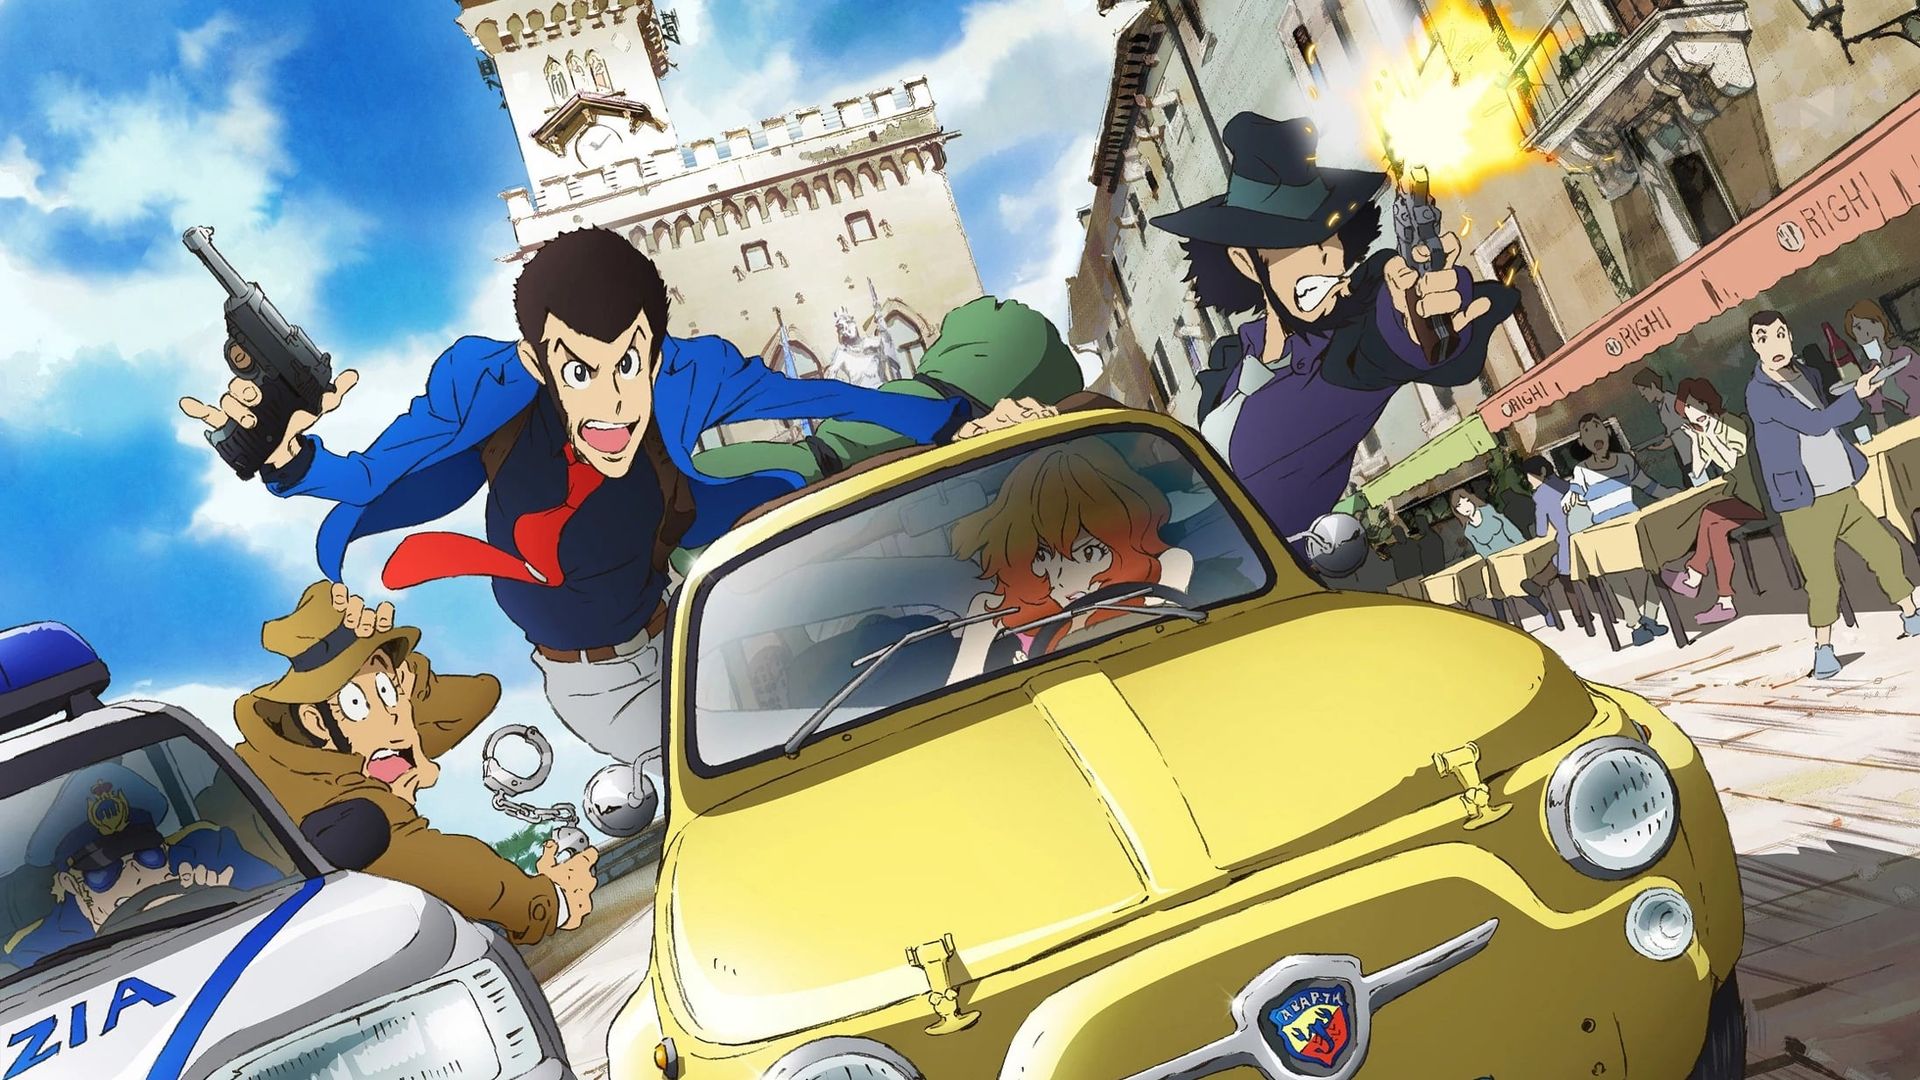 Lupin the Third Backdrop